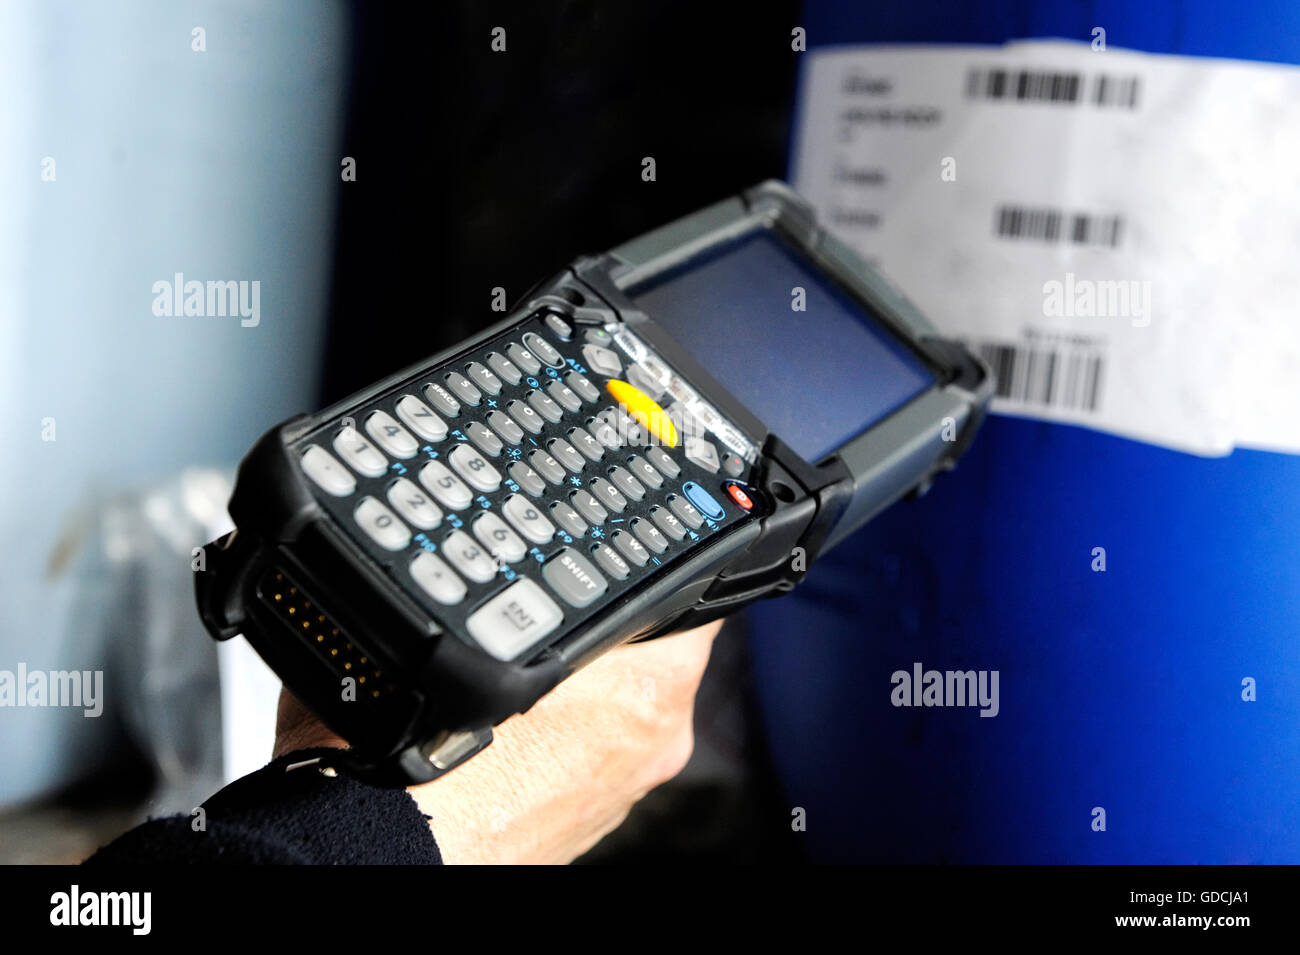 Hand of a person using a bar scanner to read information on a retail product while checking price or inventory in a shop Stock Photo